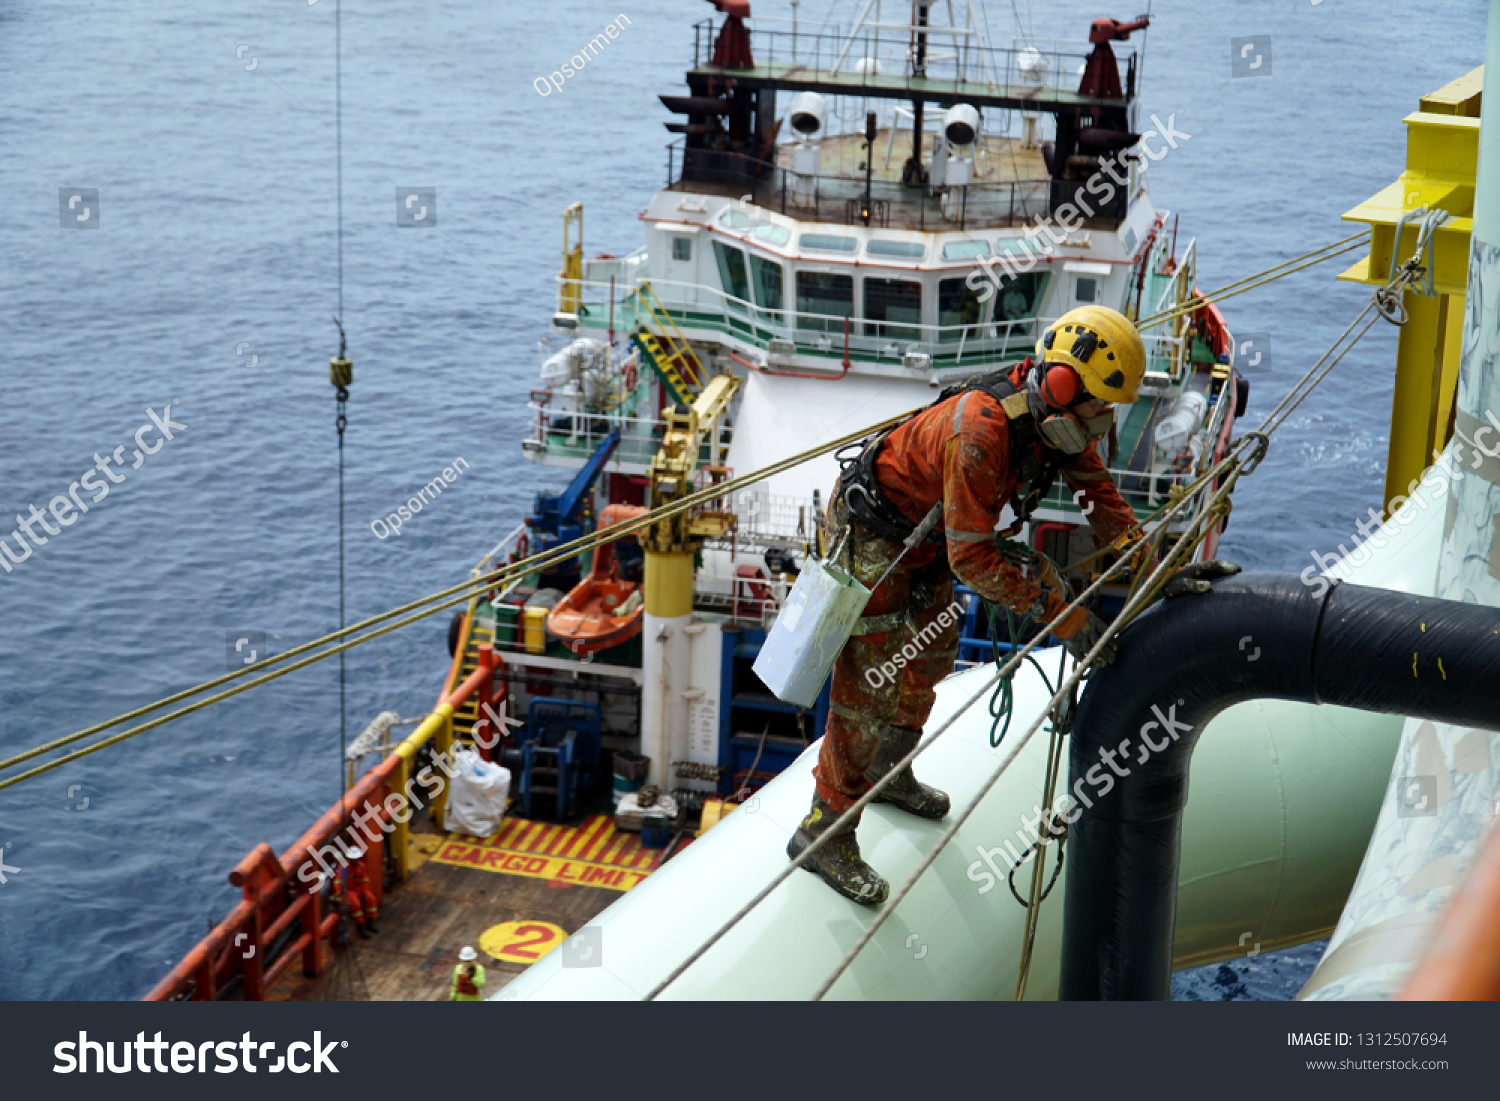 An abseiler wearing Personal Protective Equipment (PPE) standing on pipeline for painting activities with background marine vessel floating at the sea. #1312507694